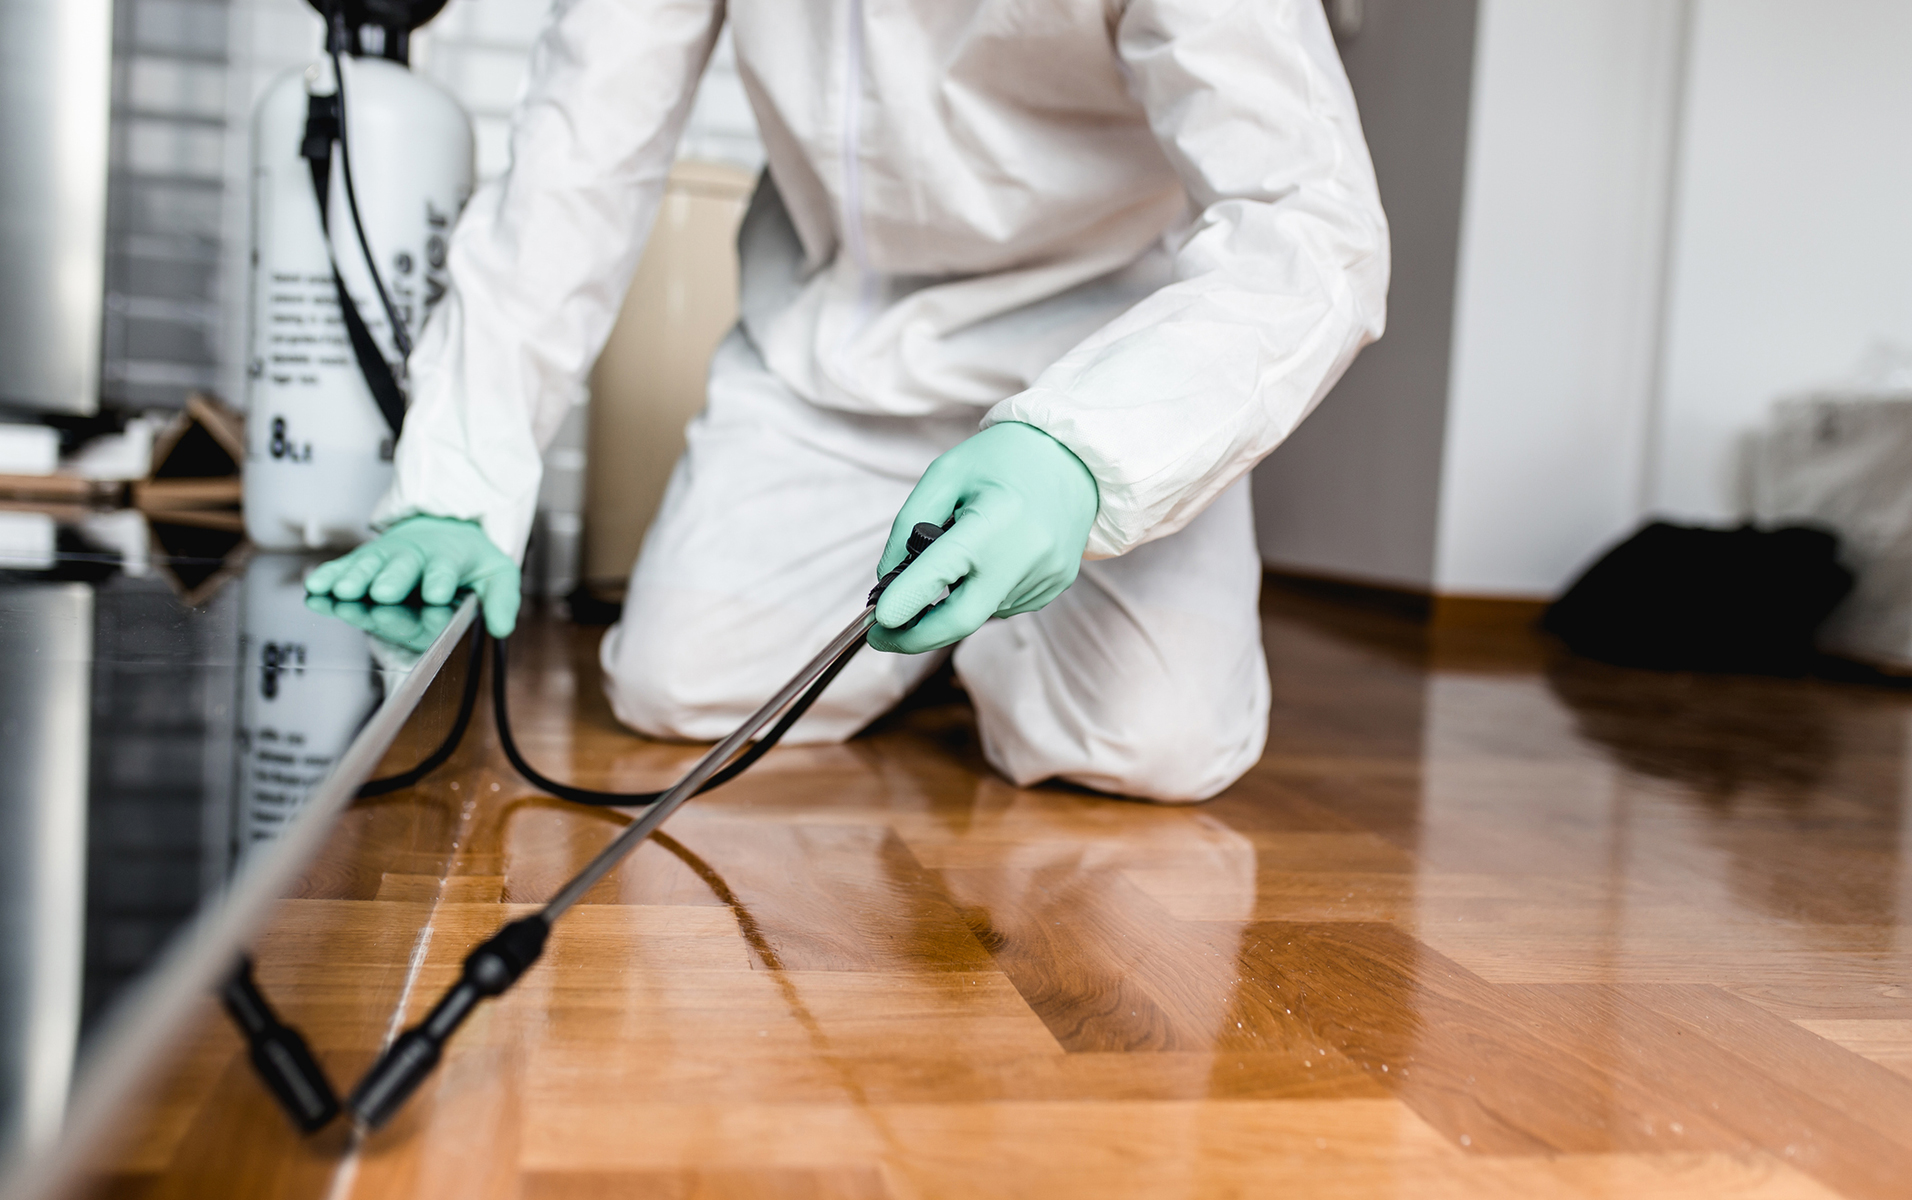 Pest Control Services in Doha Qatar